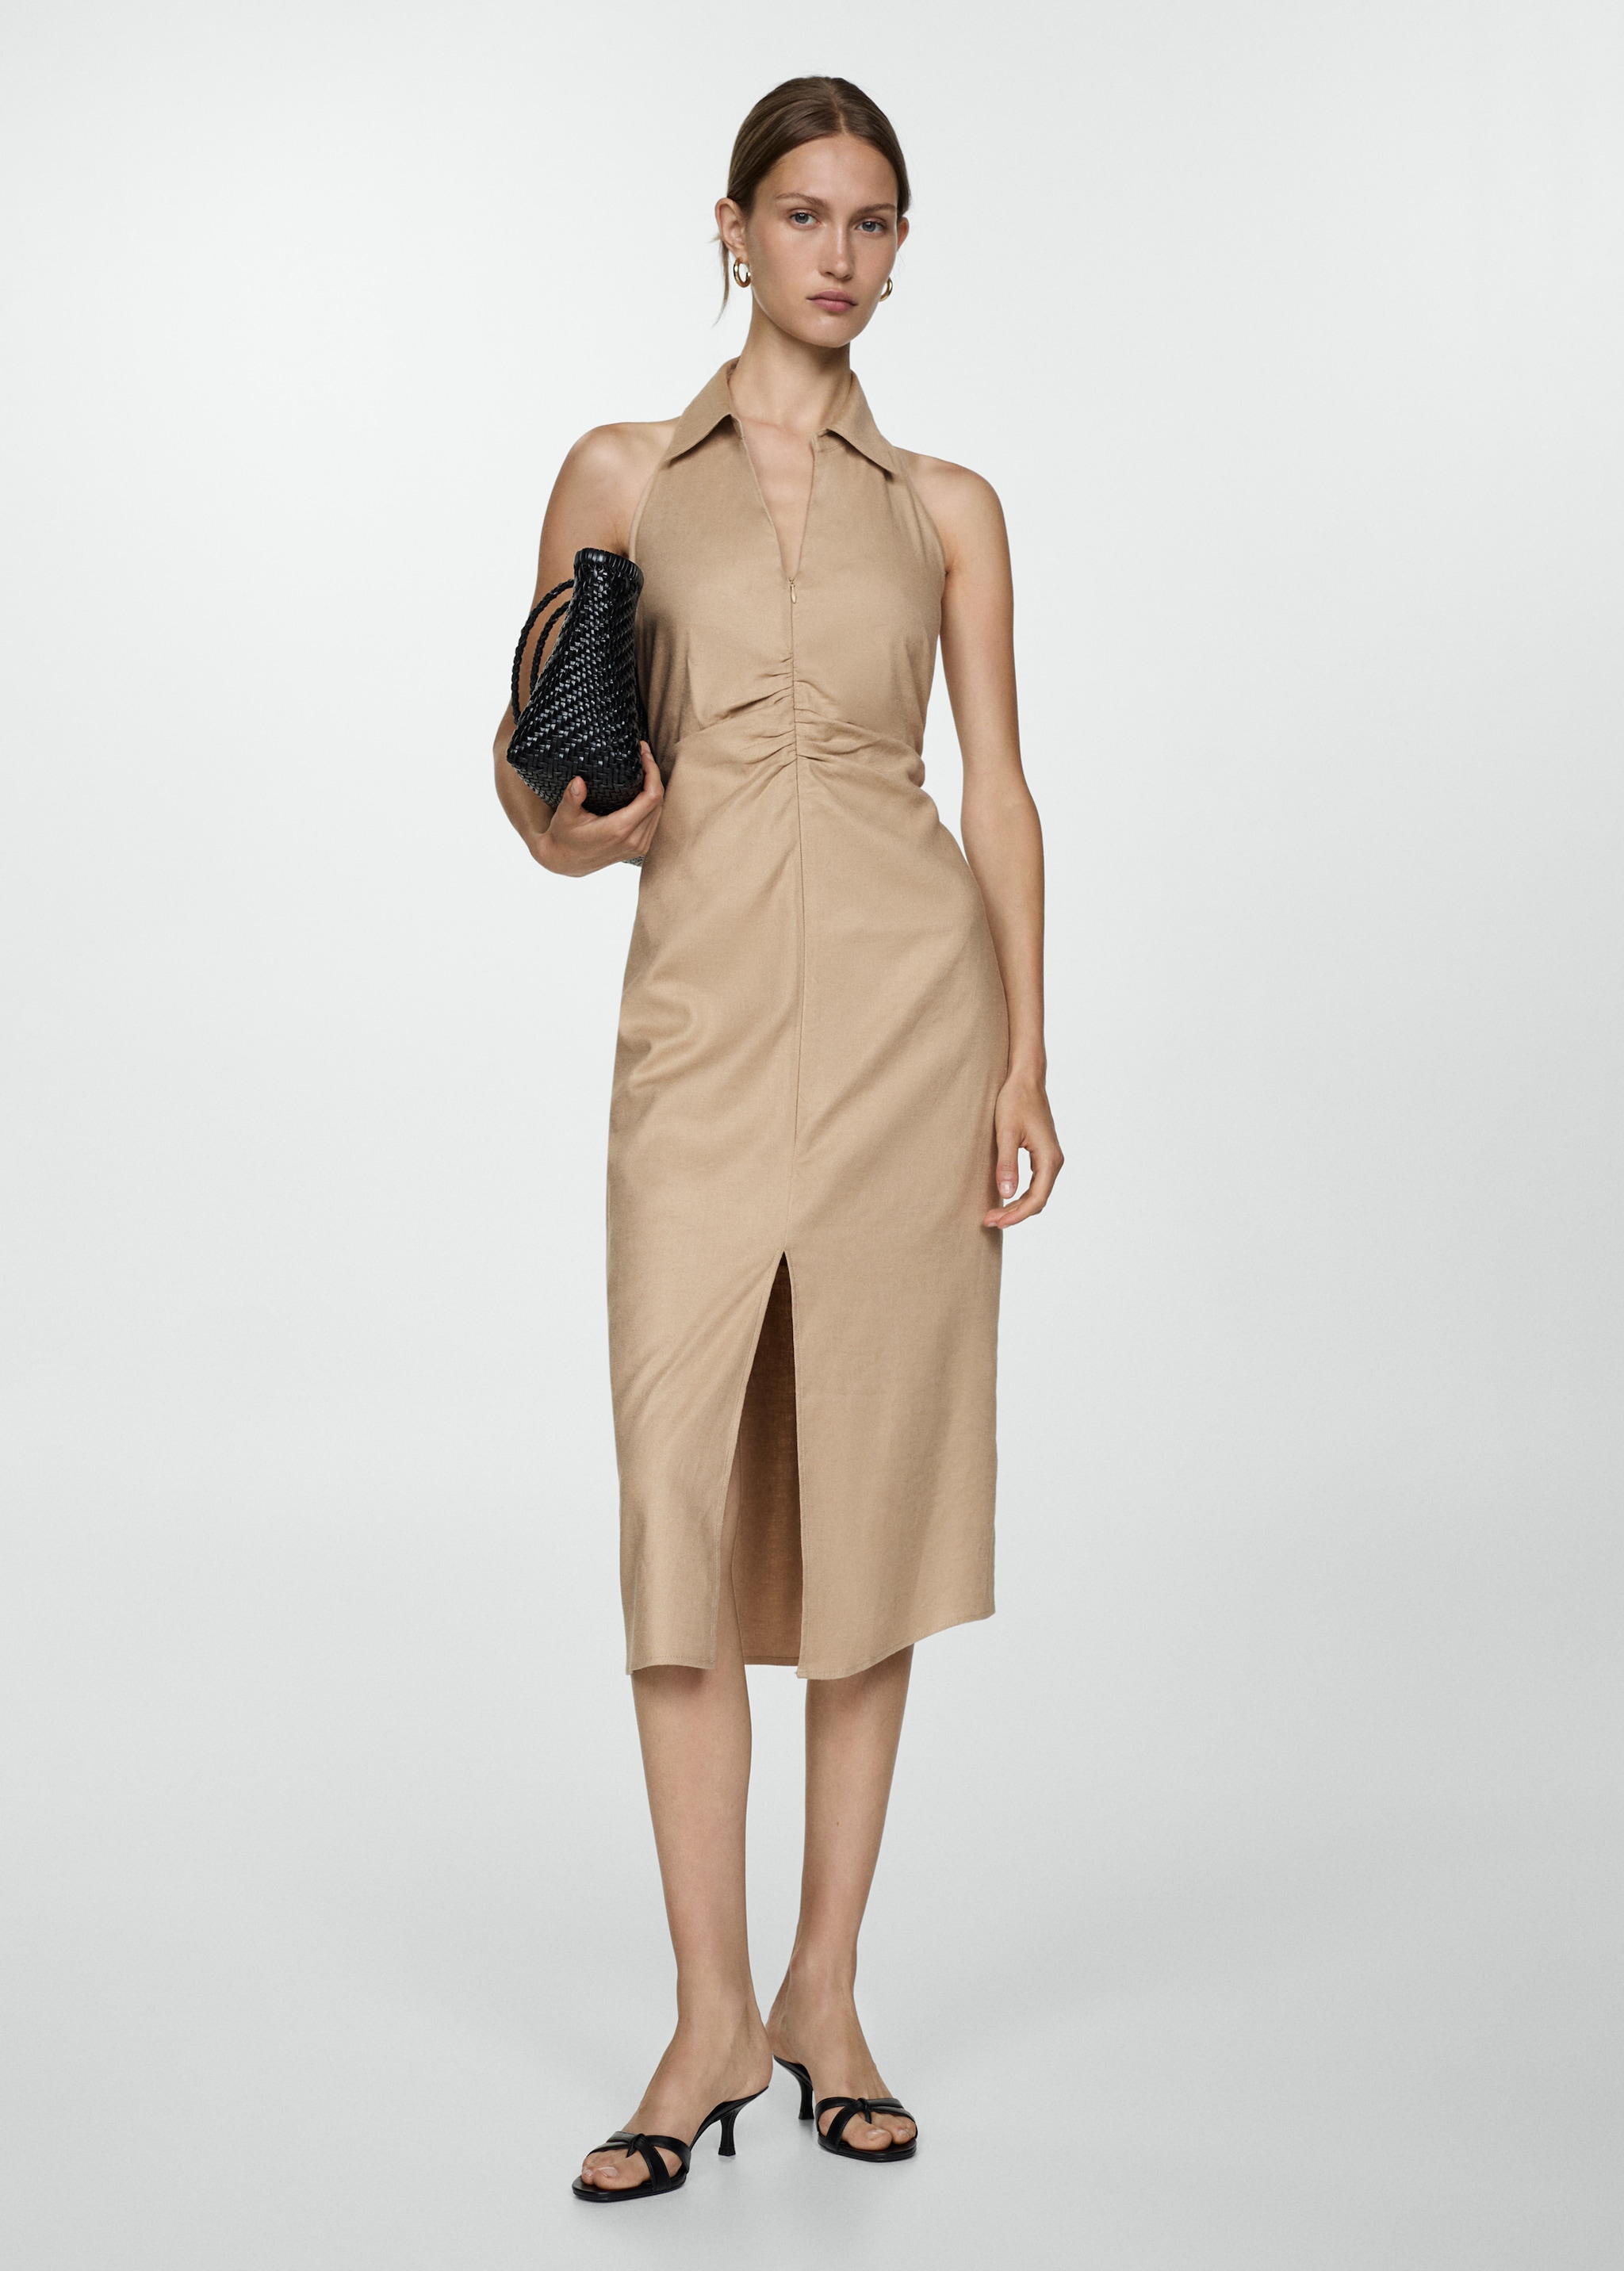 Opening polo neck dress - General plane